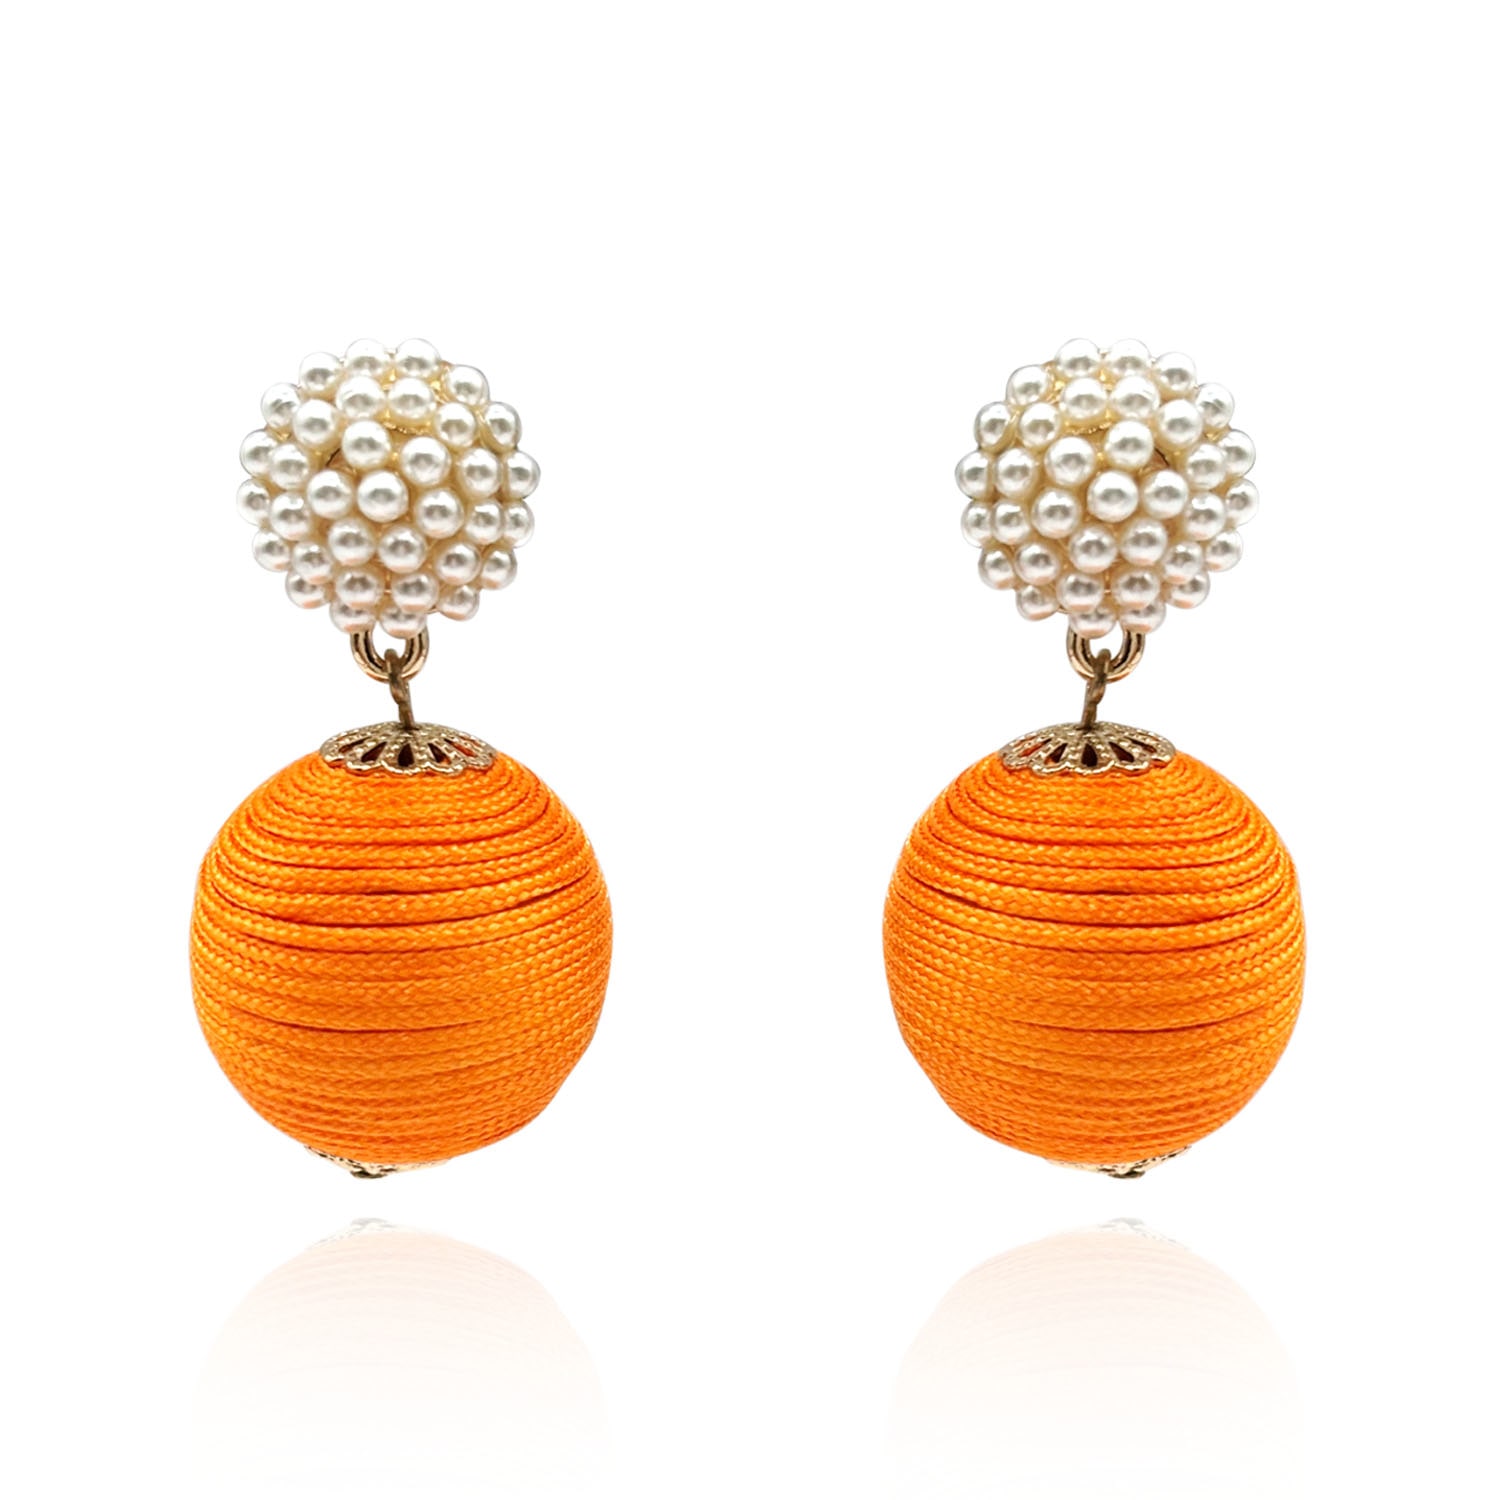 Michael Nash Jewelry Women's Yellow / Orange Bright Orange Silk Ball Earrings With Gold-plated Pearl Tops